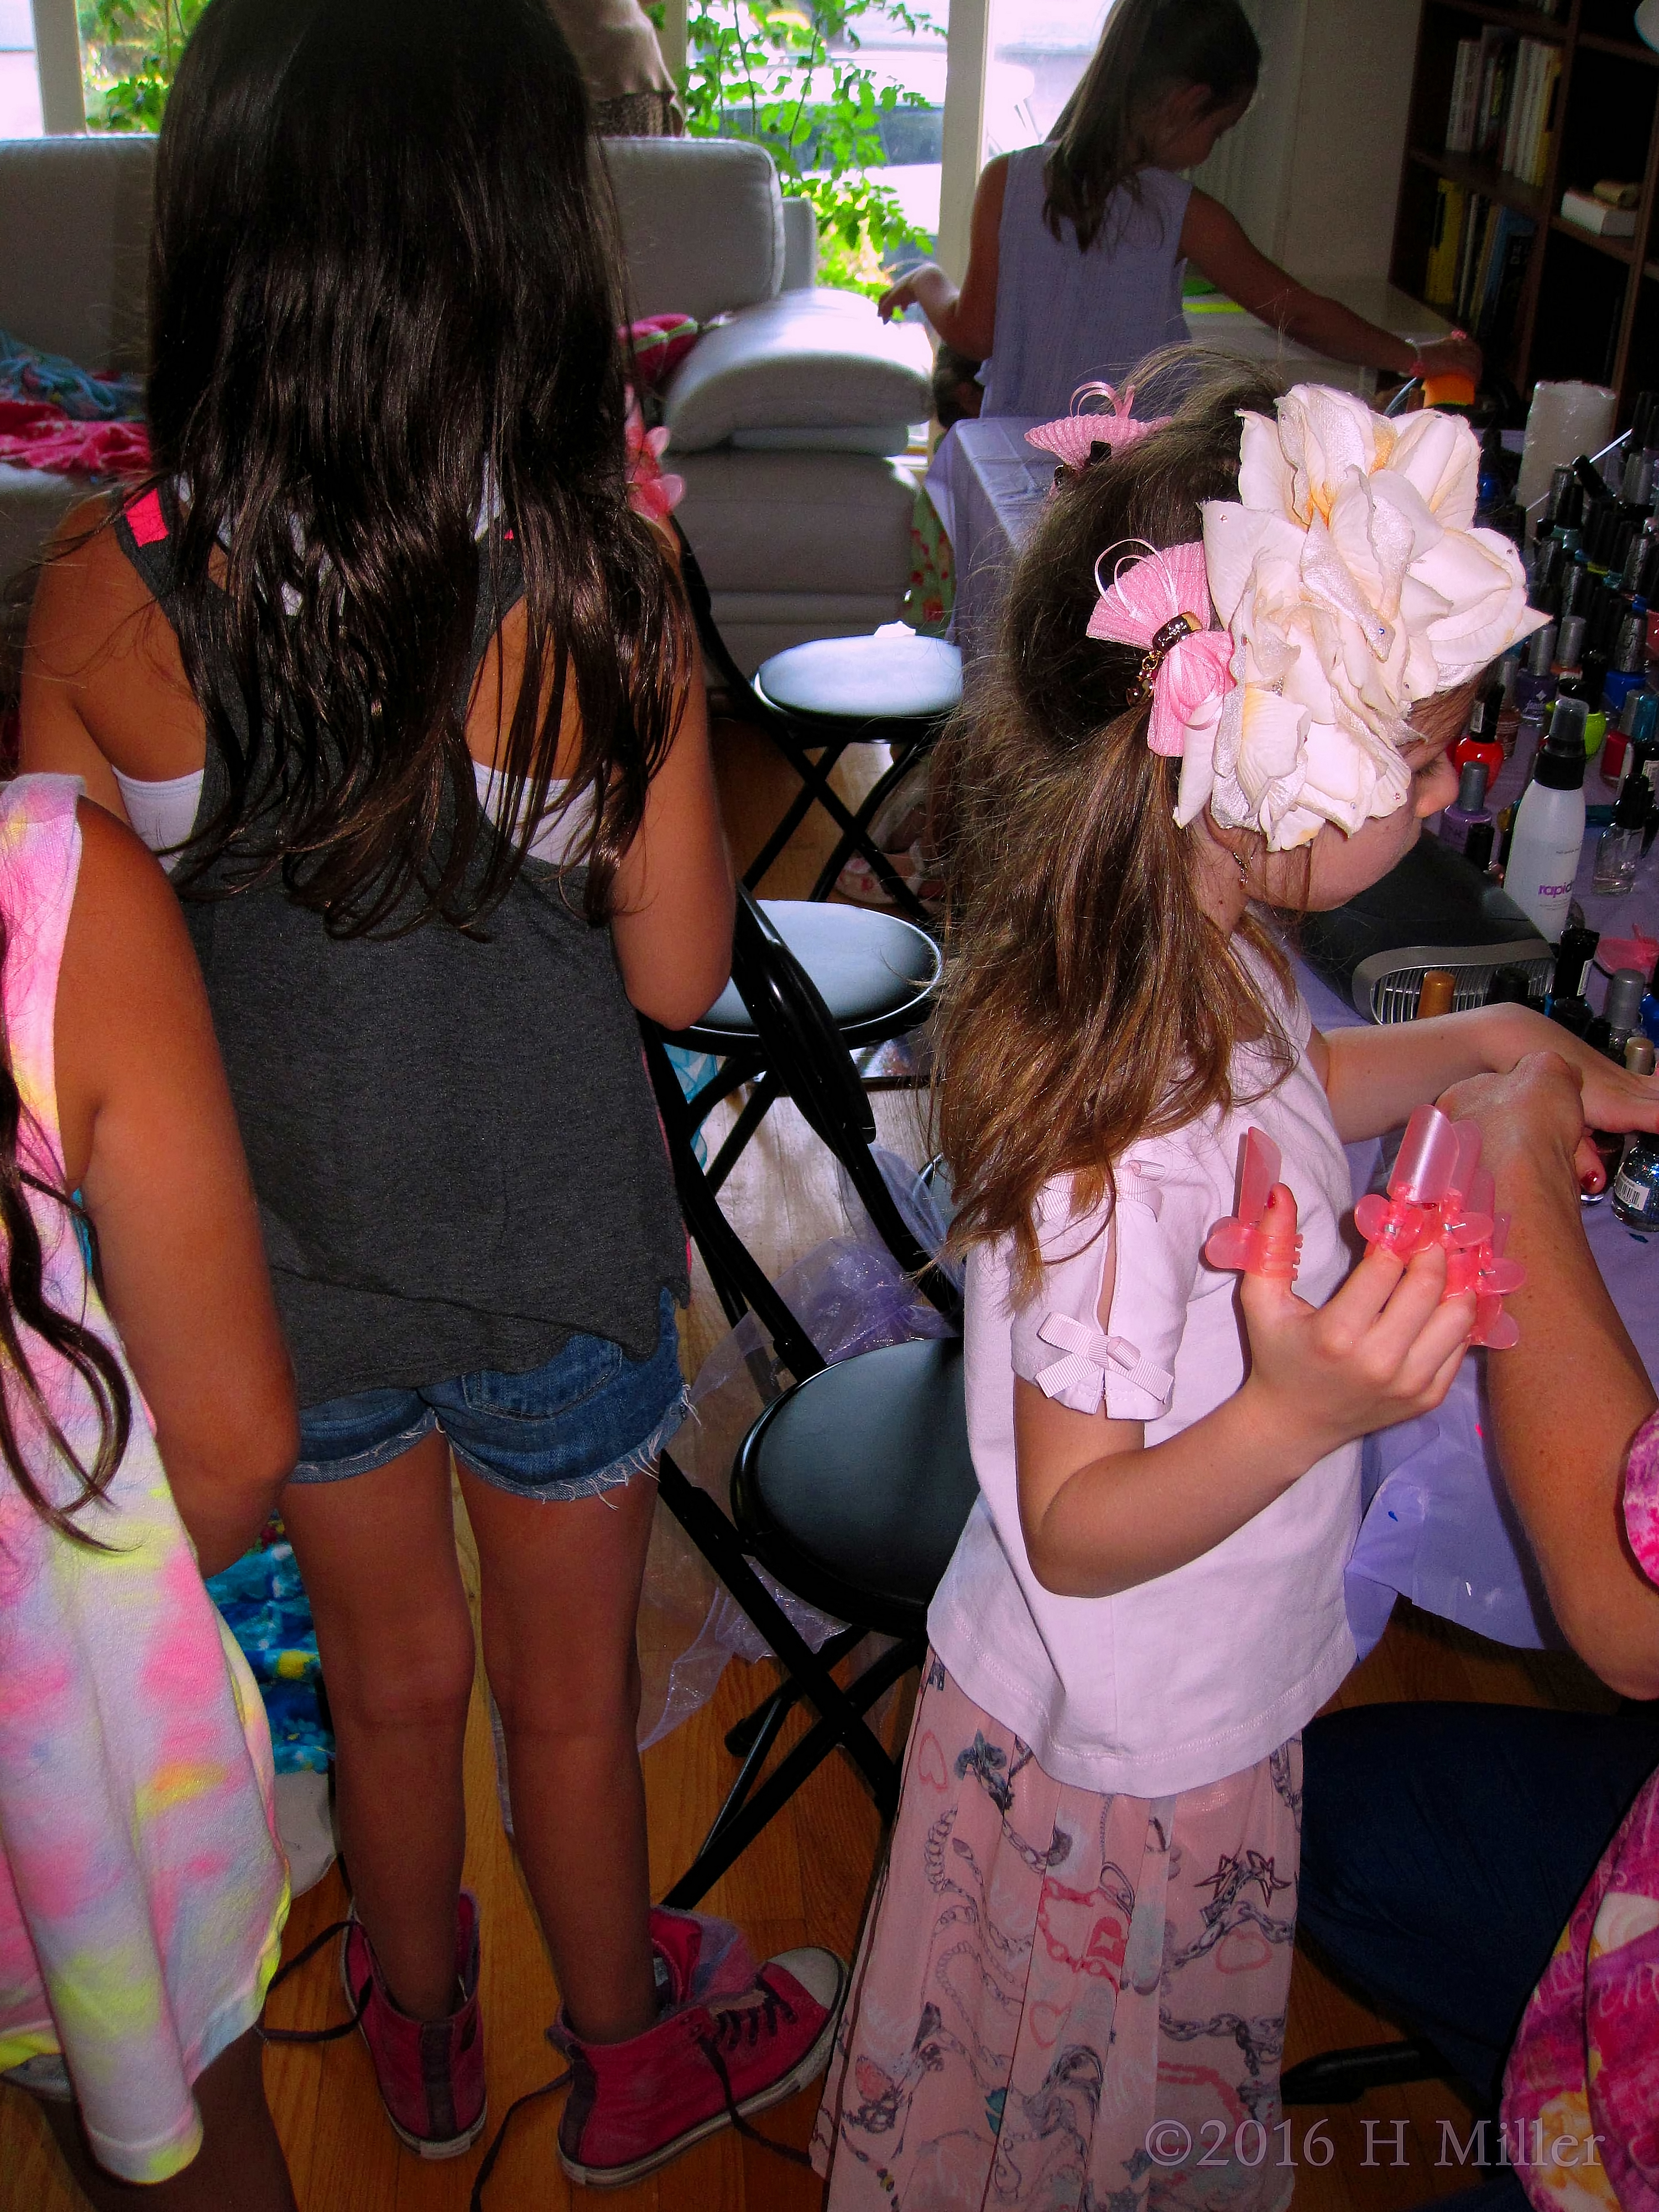 Fun Spa Crafts At The Party For Kids! 